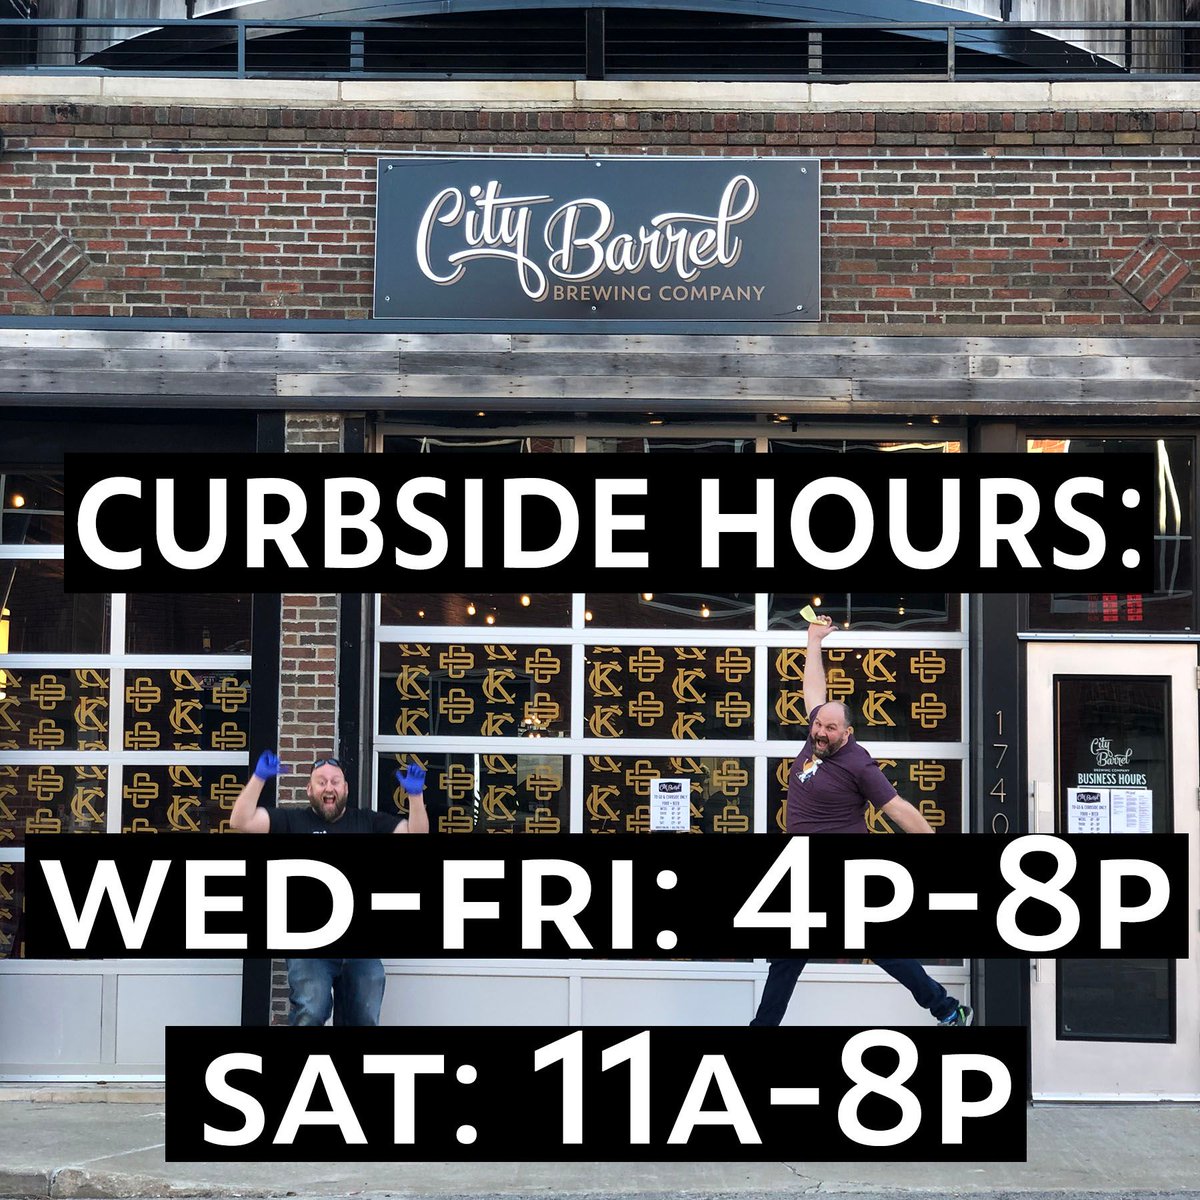 Hey everyone, we have updated our hours for Curbside pick up. Thank you SOOOOO much for the support but we need a break to sleep and make more beer! Stay safe, stay strong Kansas City.